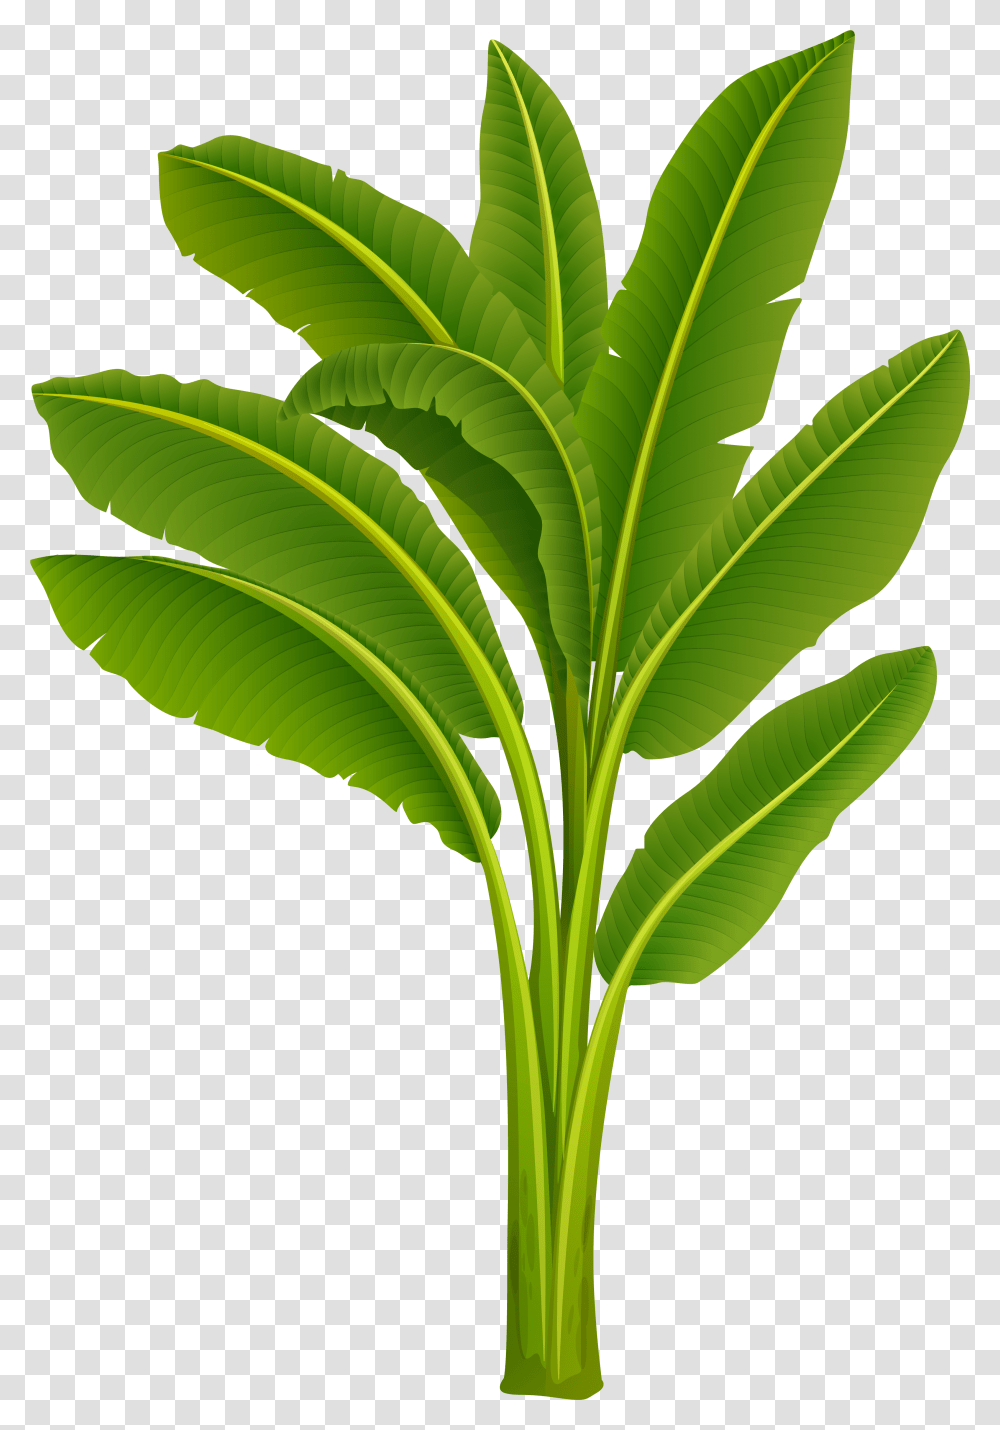 Library Of Banana Tree Leaves Jpg Freeuse Stock Files Banana Tree, Plant, Leaf, Green, Veins Transparent Png